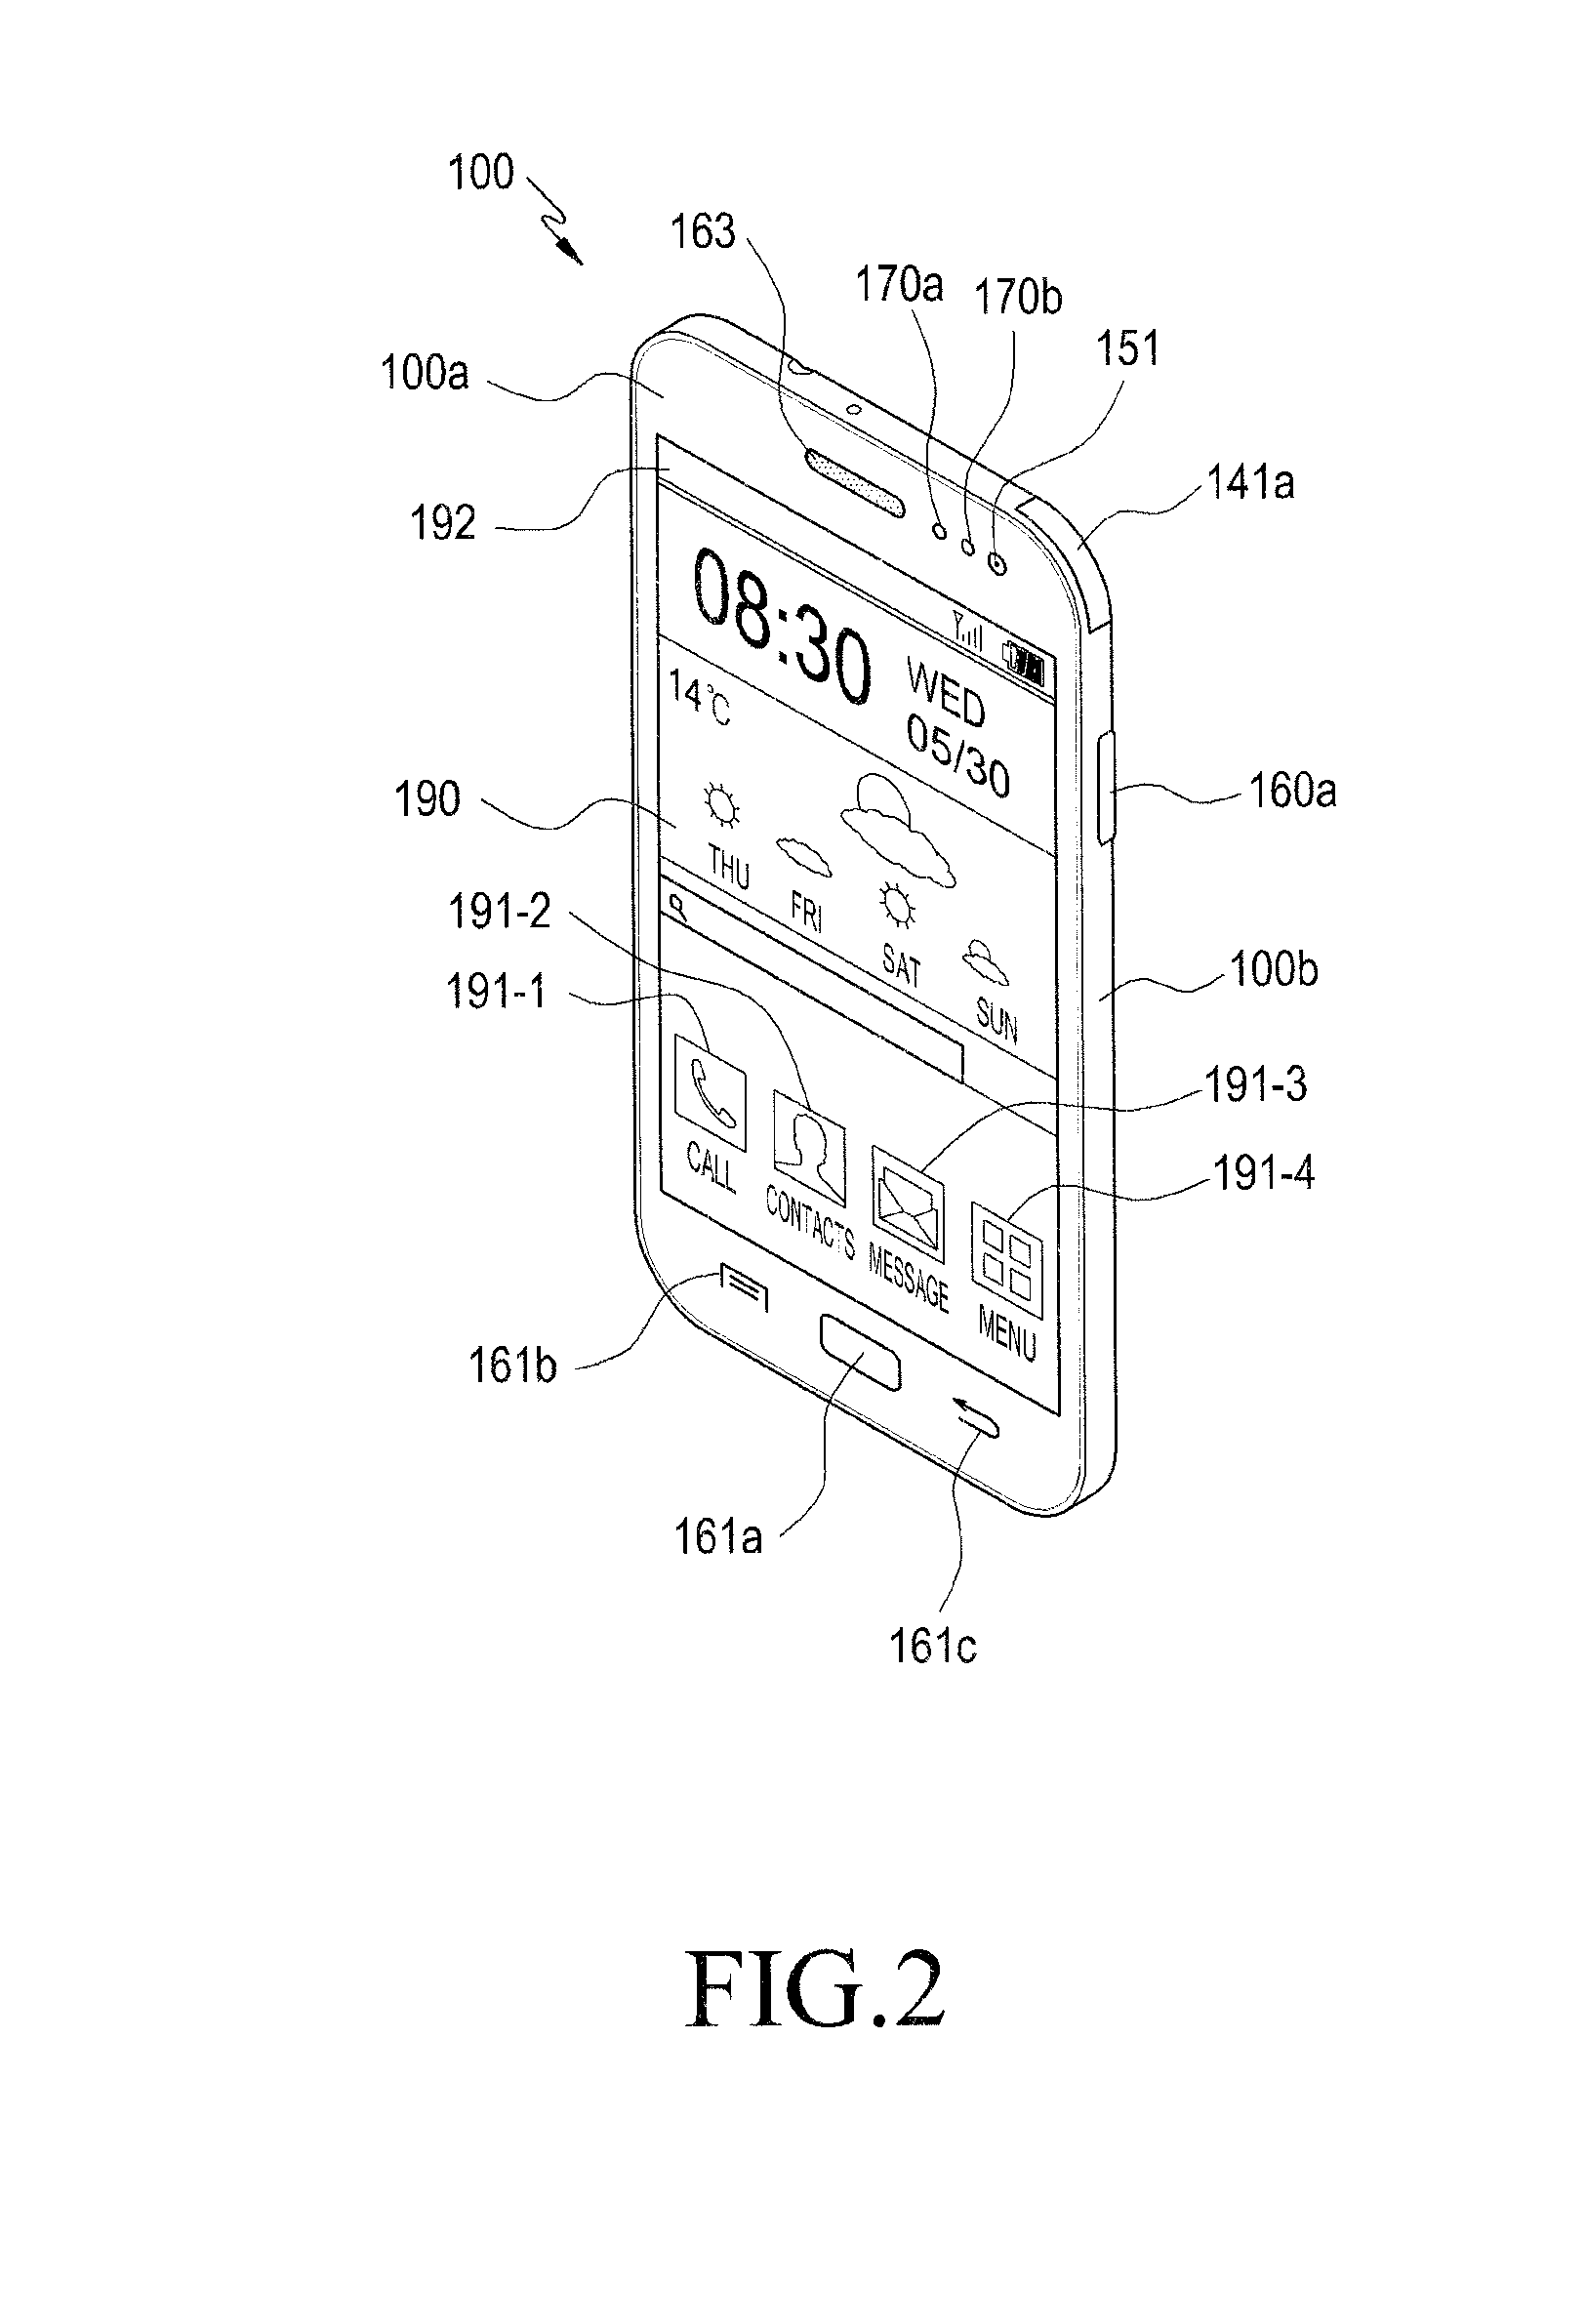 Apparatus and method for providing application list depending on external device connected to mobile device